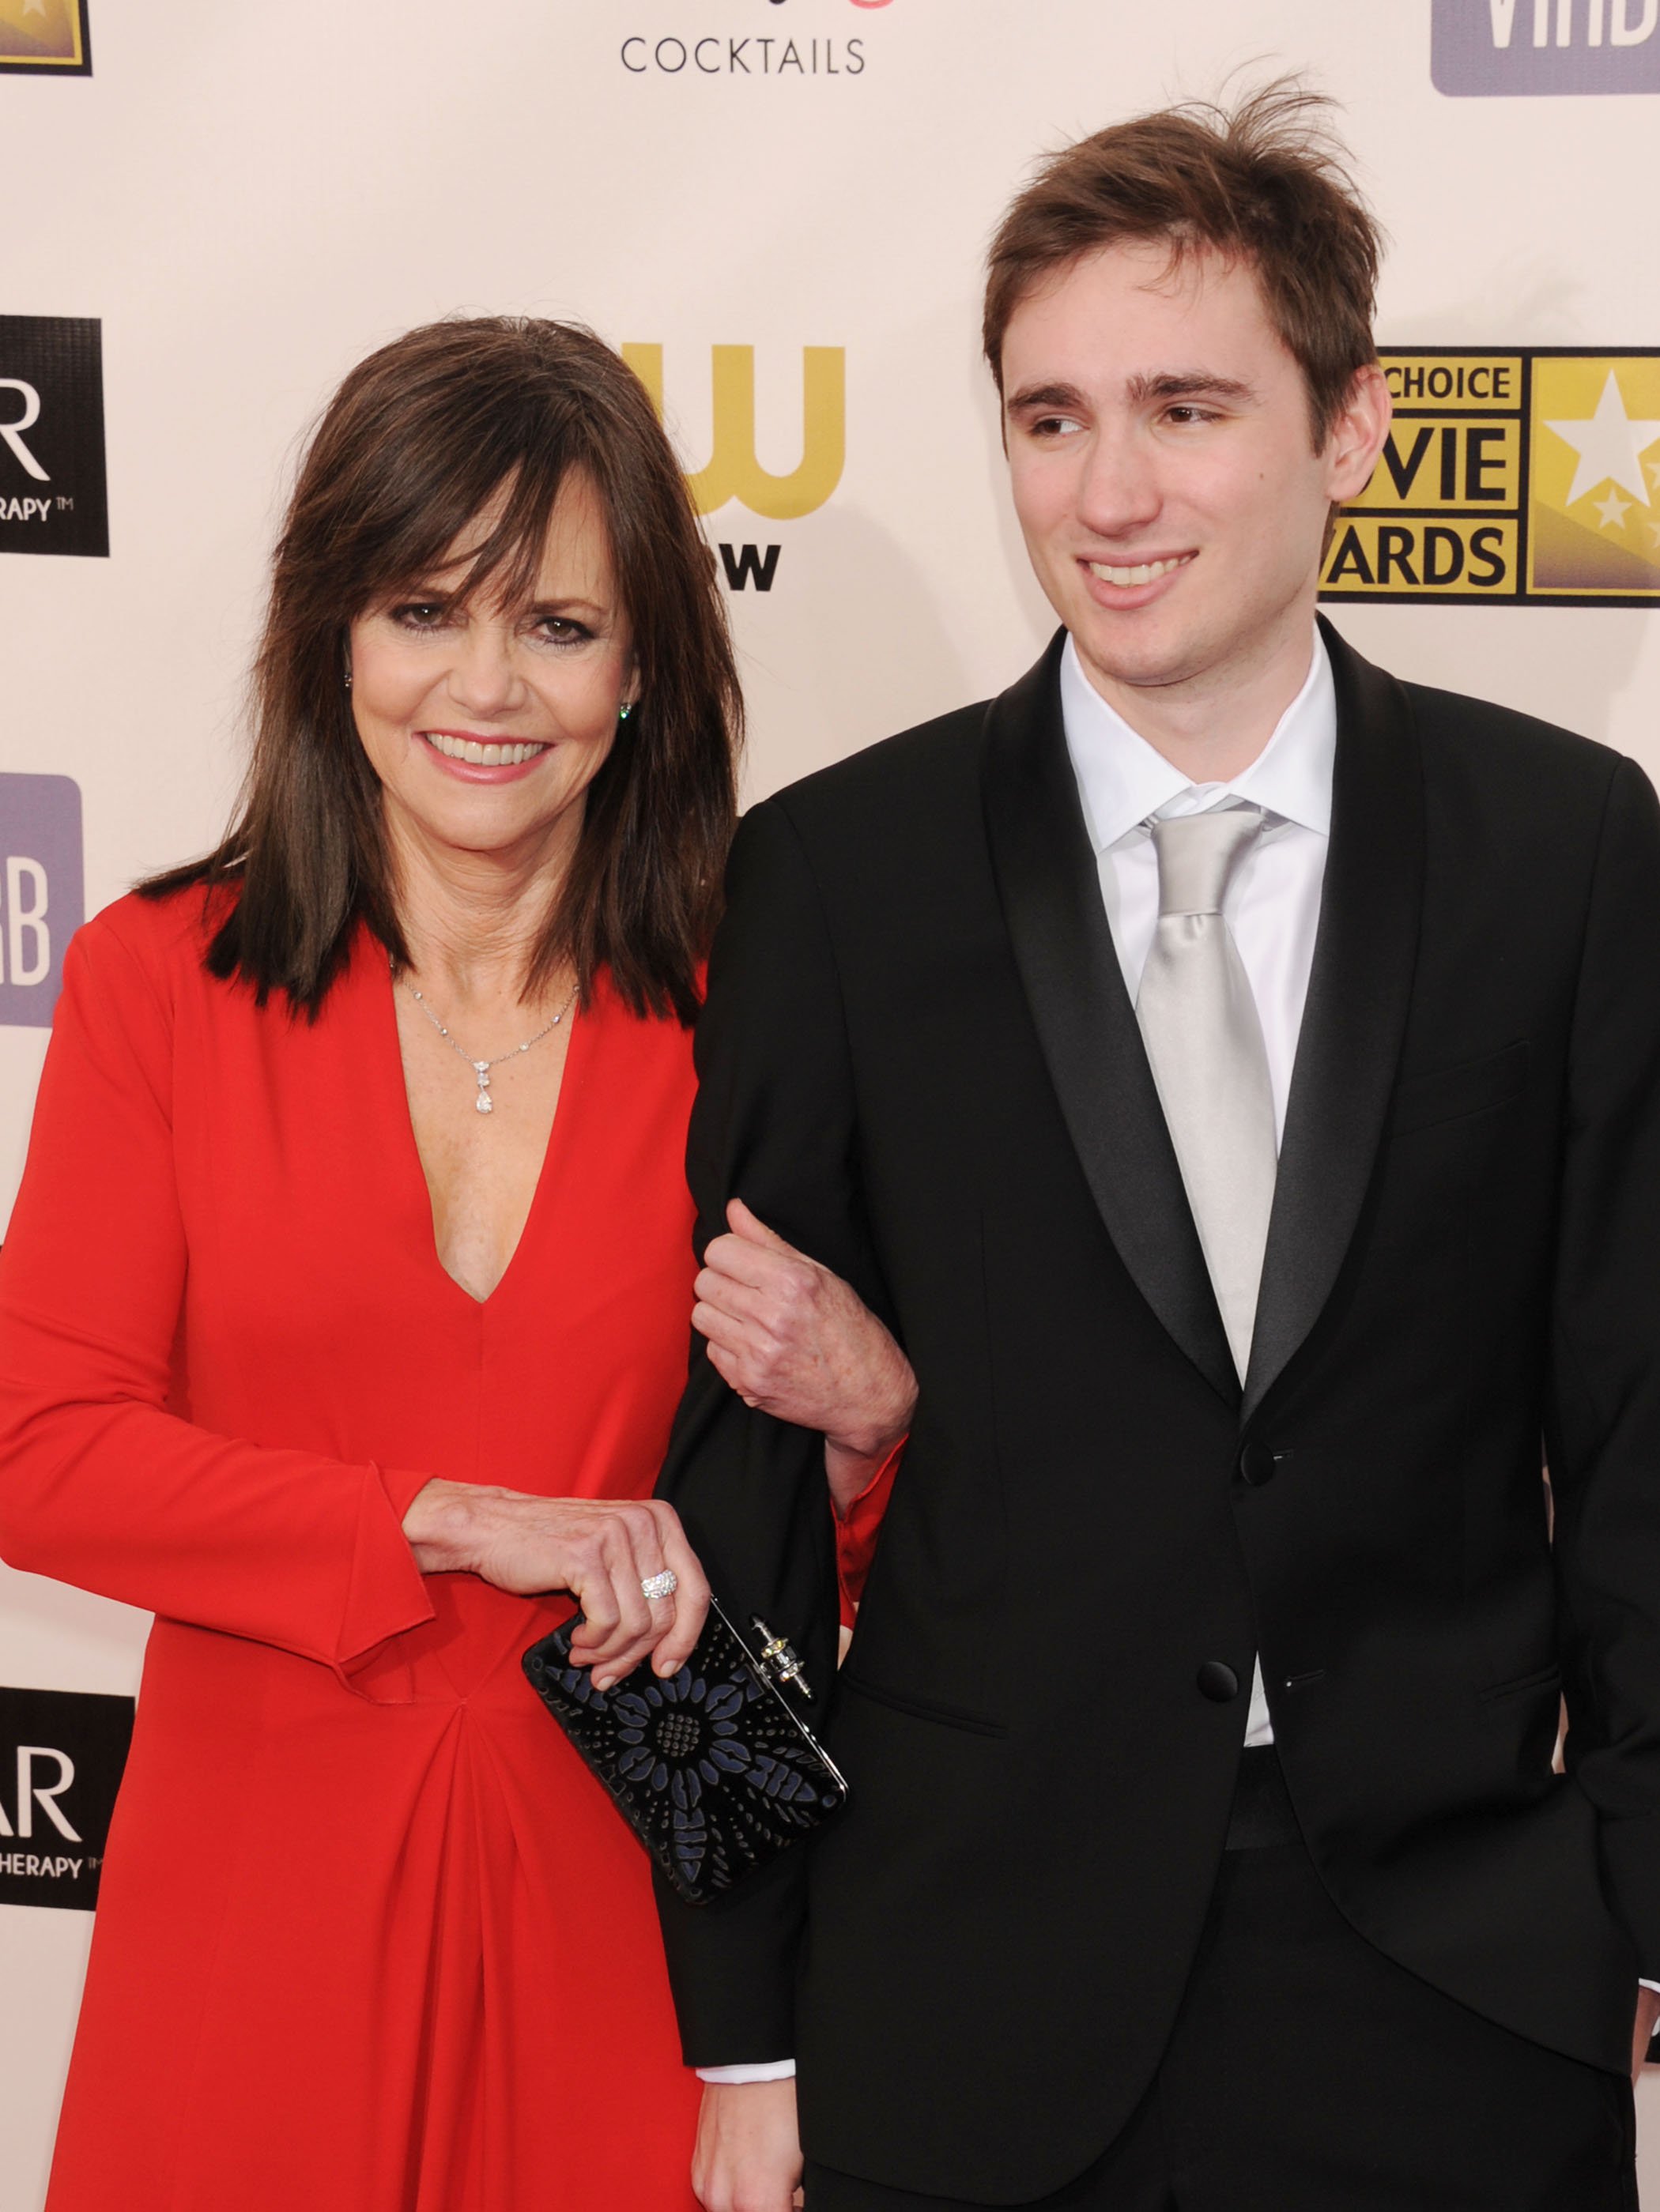 Actress Sally Field and son Sam Greisman arrive at the 18th Annual Critics' Choice Movie Awards at The Barker Hangar on January 10, 2013 in Santa Monica, California. | Source: Getty Images